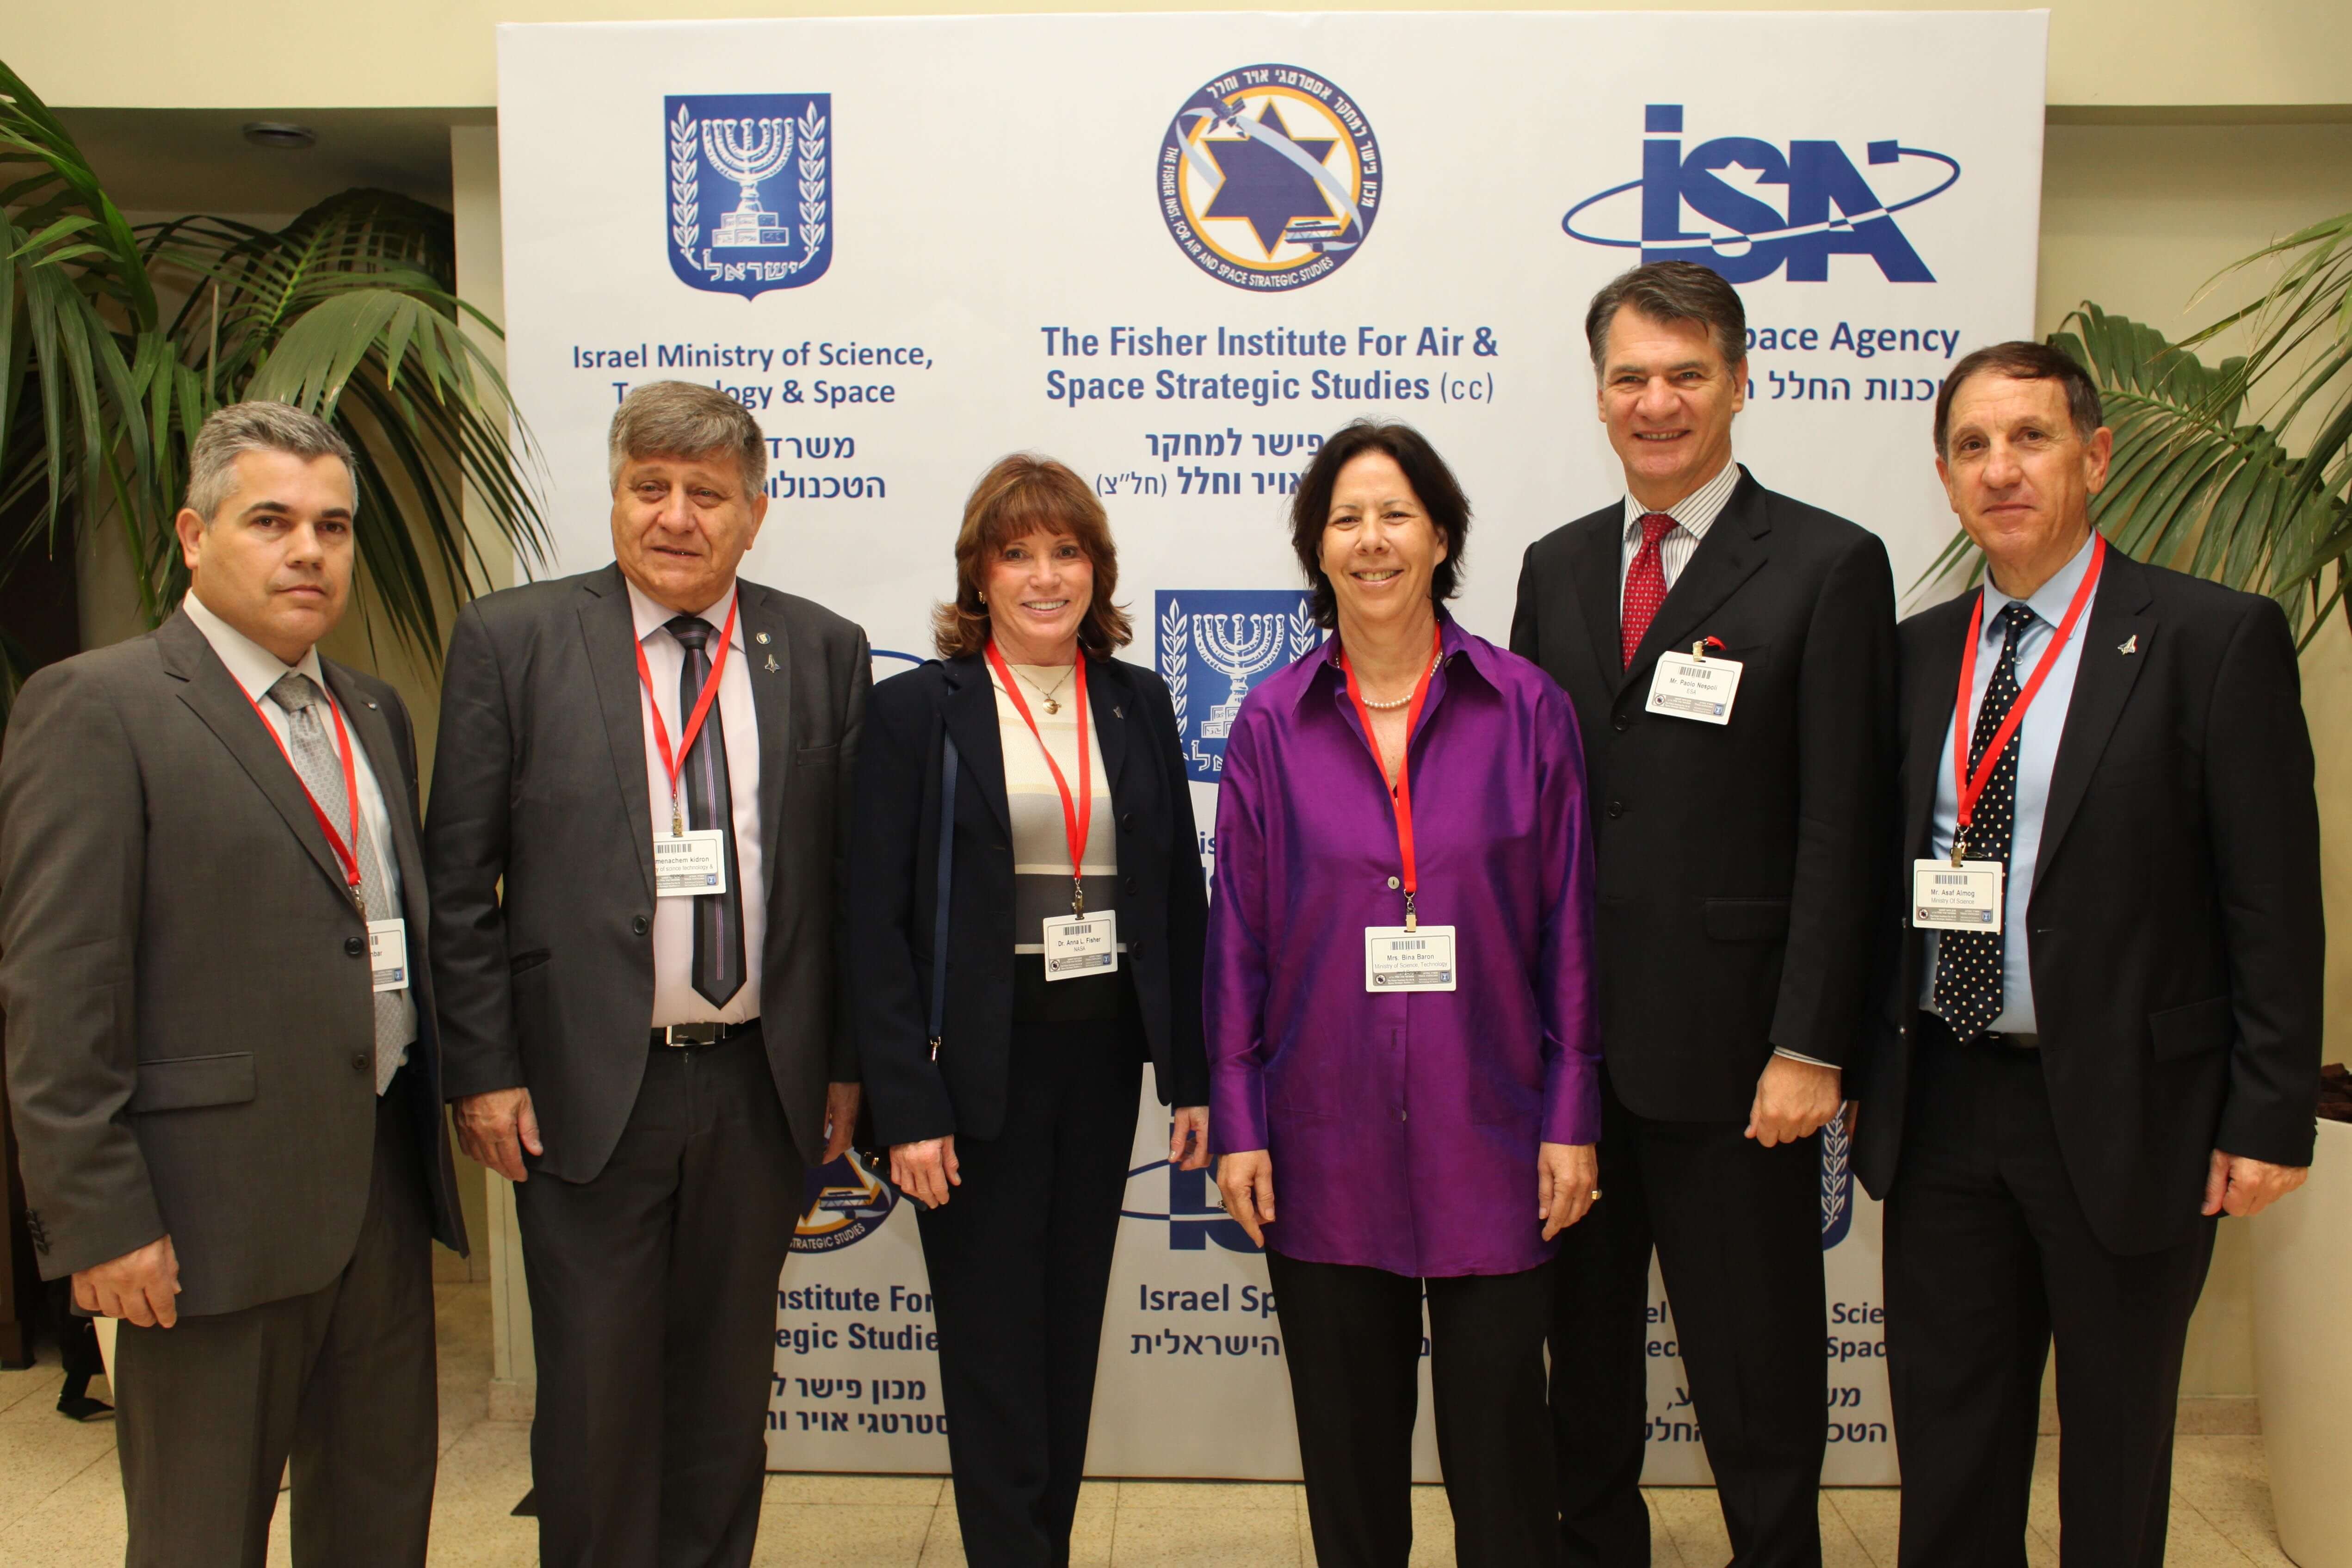 Right: Asaf Agmon, head of the Fisher Institute; Paolo Nespoli, an astronaut from the European Space Agency; Bina Bar-On, Director General of the Ministry of Science; Anna Fisher, Astronaut from NASA; Menachem Kidron, Director of the Israel Space Agency; Vetal Inbar from the Fisher Institute. Photo: Yoav Ari Dudkewitz.